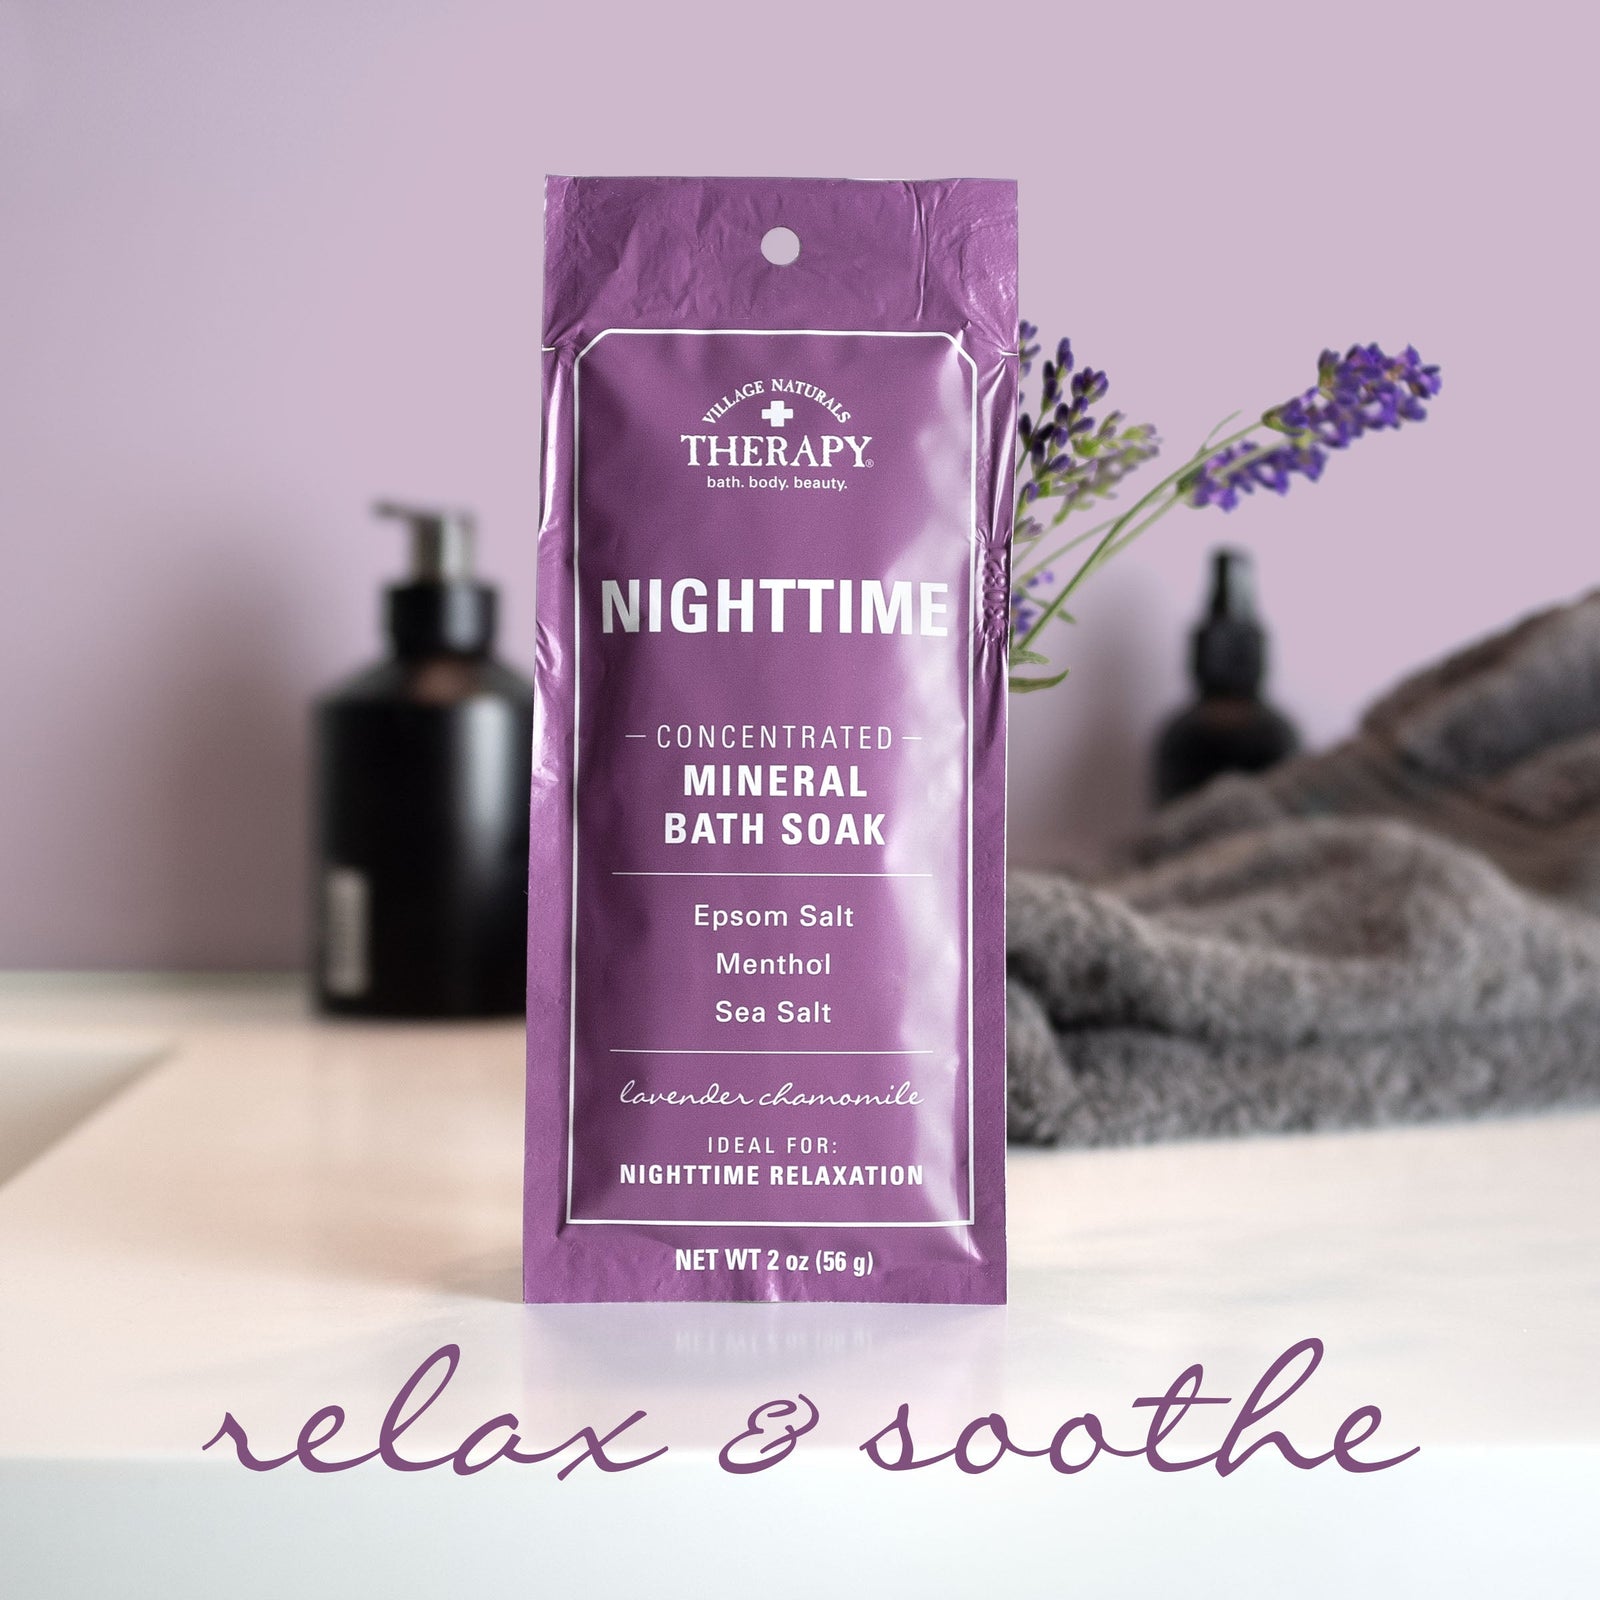 Village Naturals Therapy Nighttime Concentrated Mineral Bath Soak